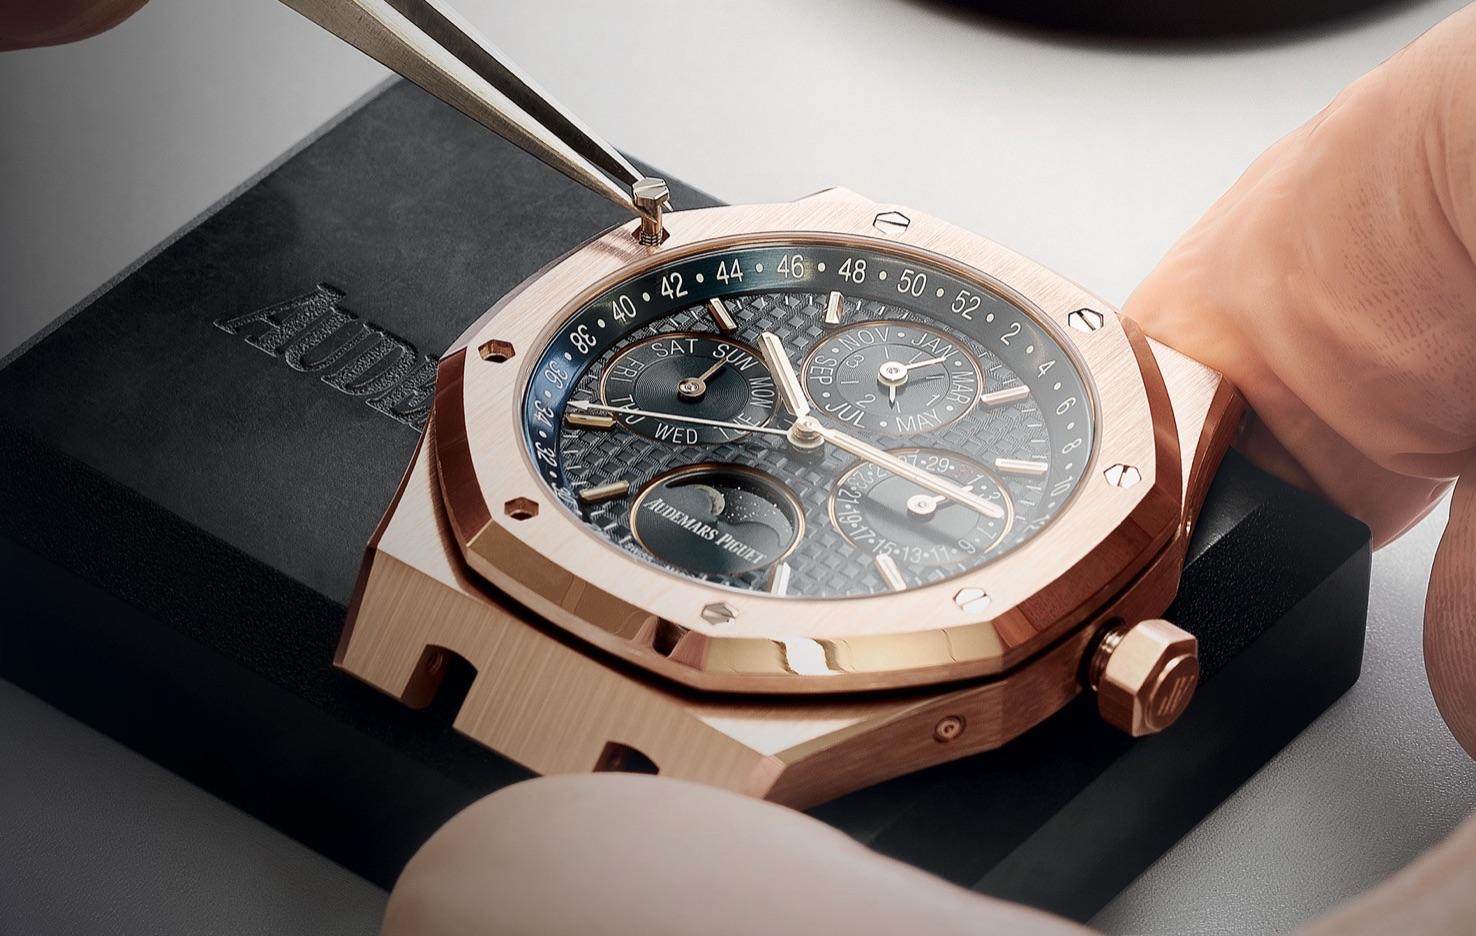 Top 10+ Must-Know Luxury Watch Brands in 2022